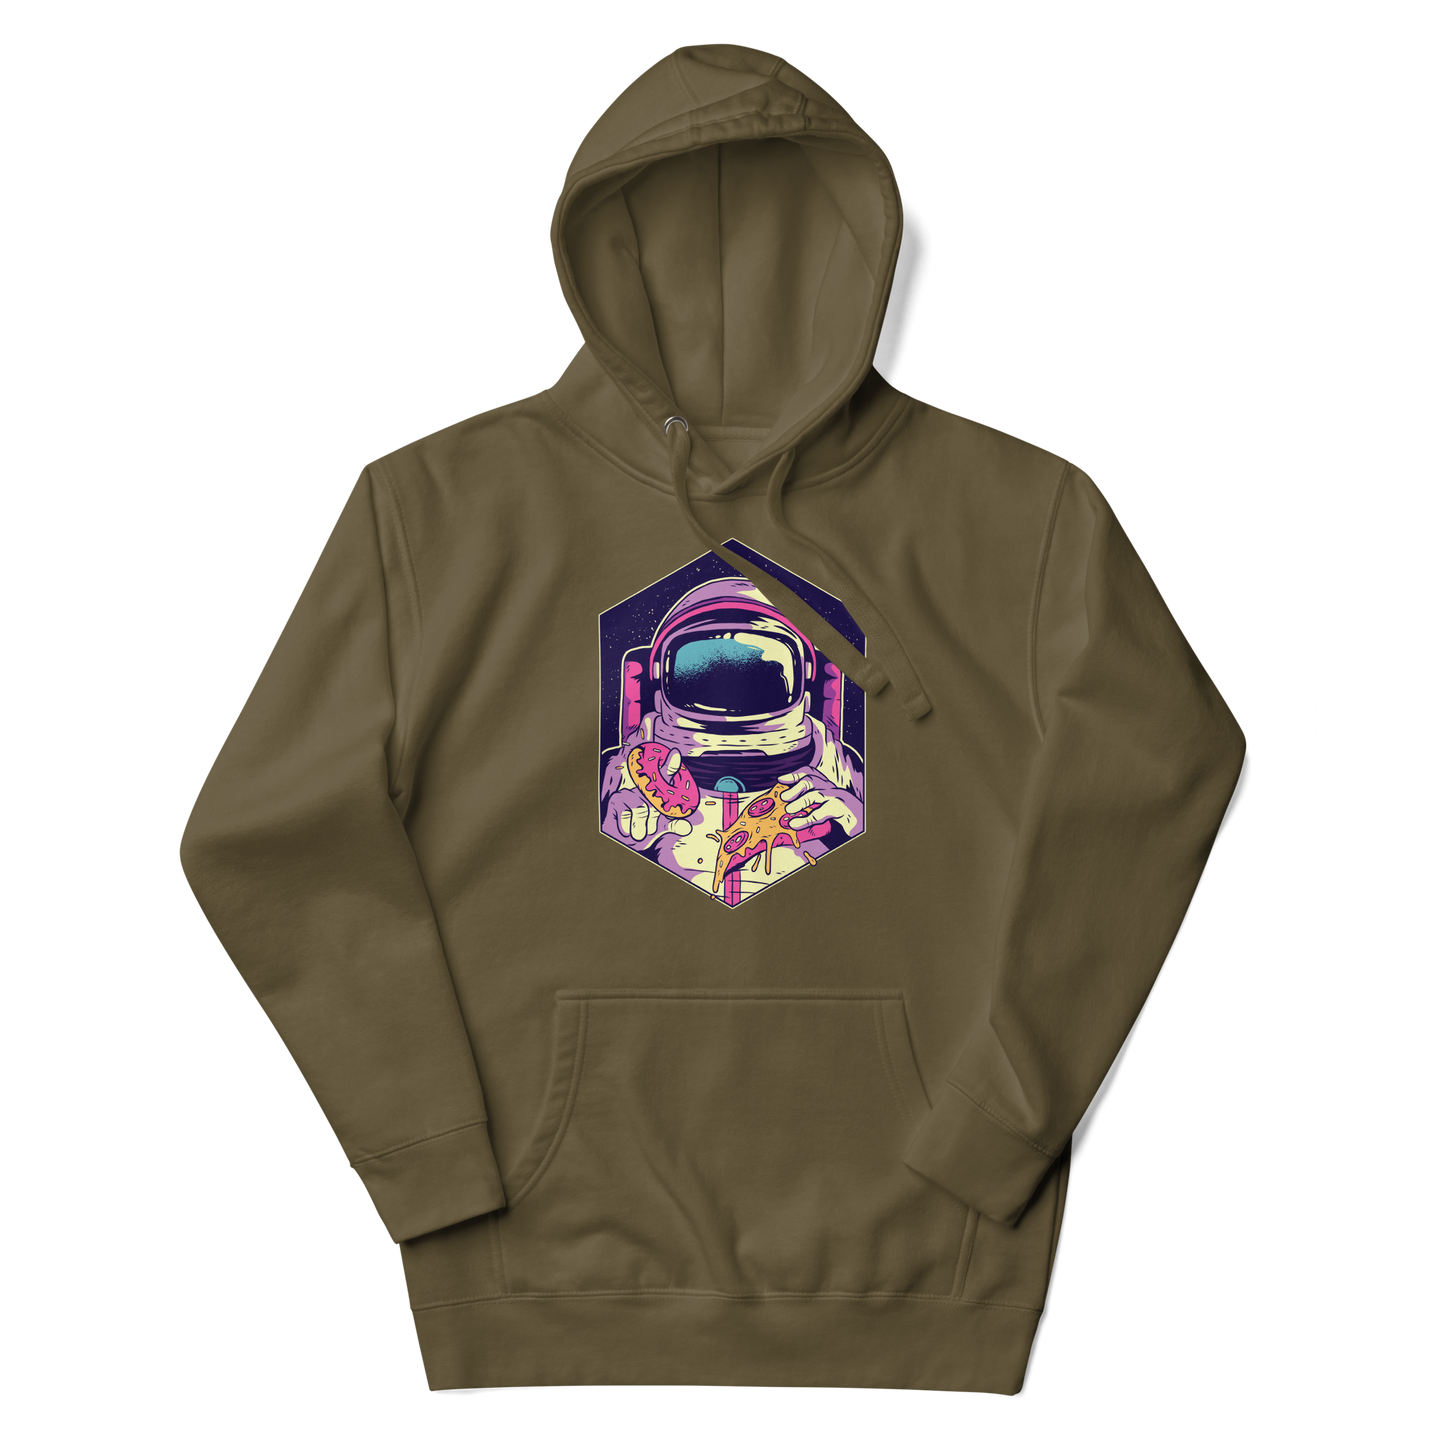 Astronaut Eating Donut and Pizza | Unisex Hoodie